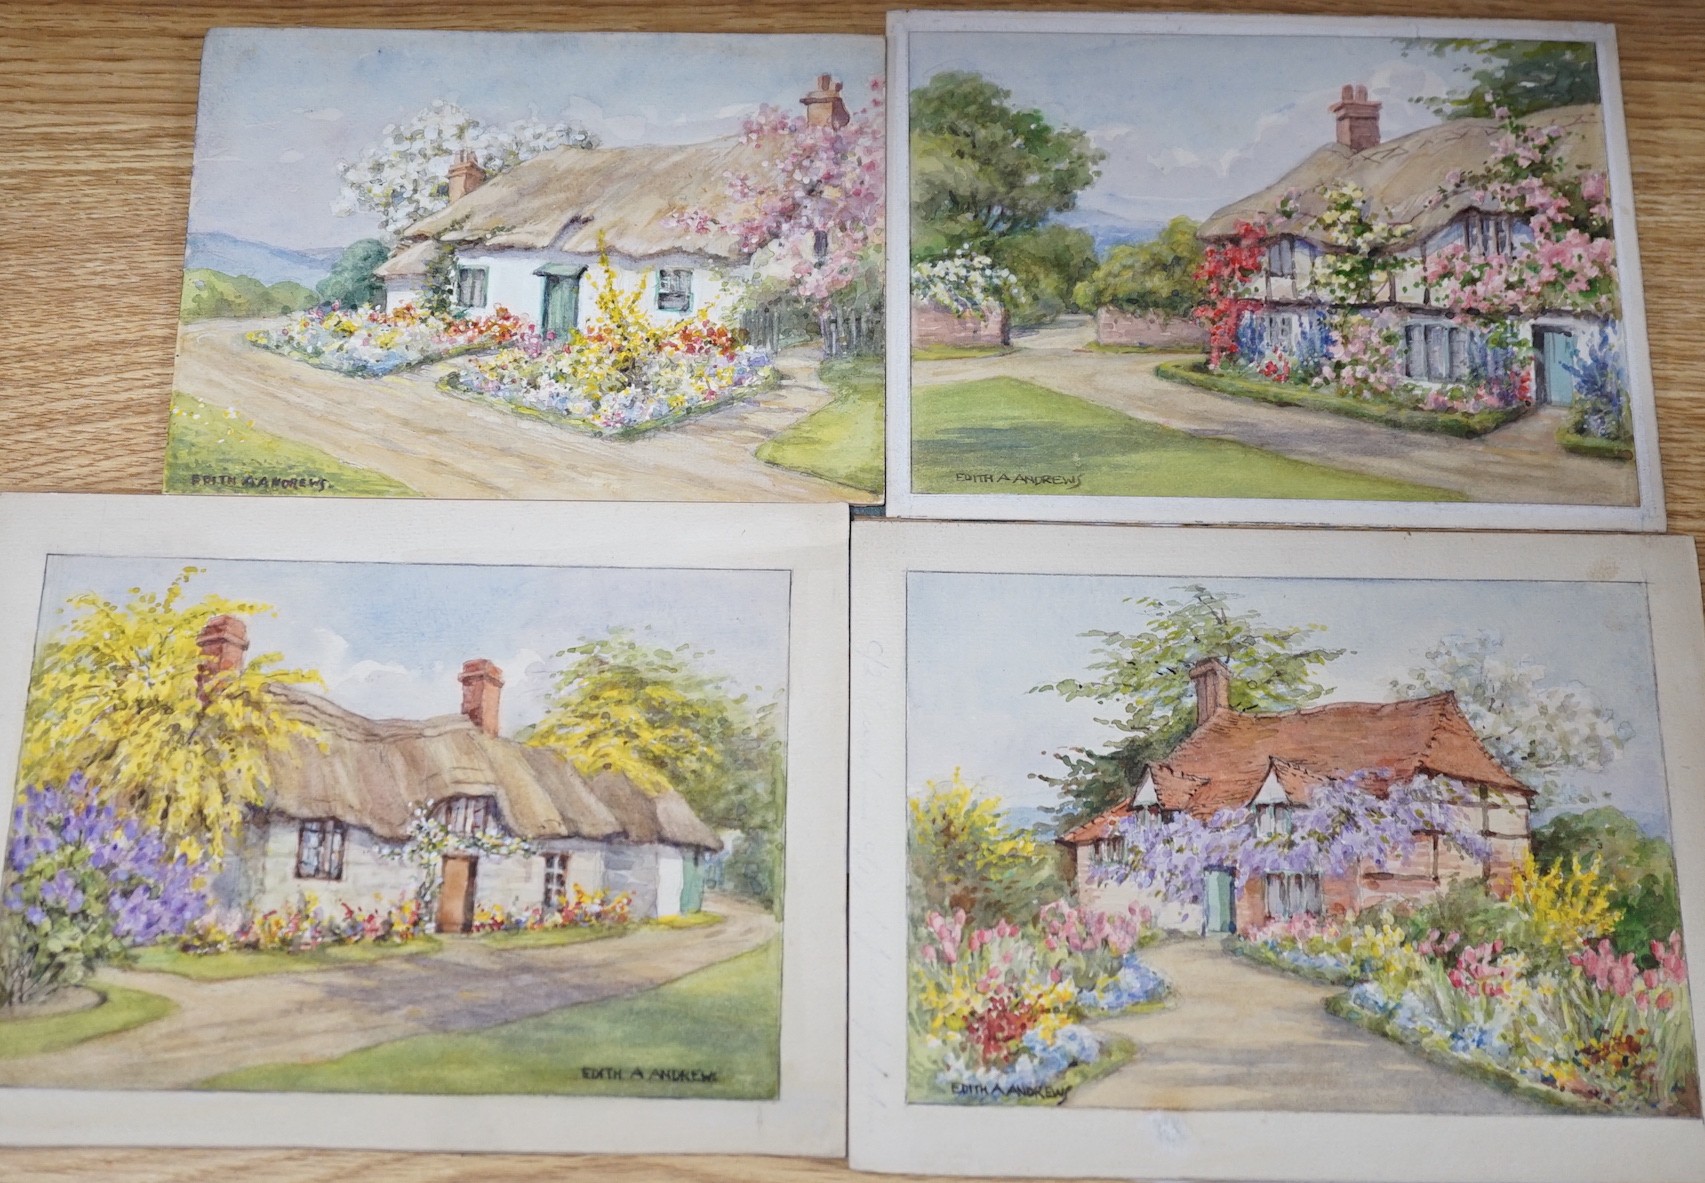 Annie Louise Pressland (1862-1933), four watercolours, Flower studies, designs for greeting cards, largest 23 x 35cm, unframed and Edith Andrews (fl. 1900-1940), six watercolours, original postcard designs, country cotta